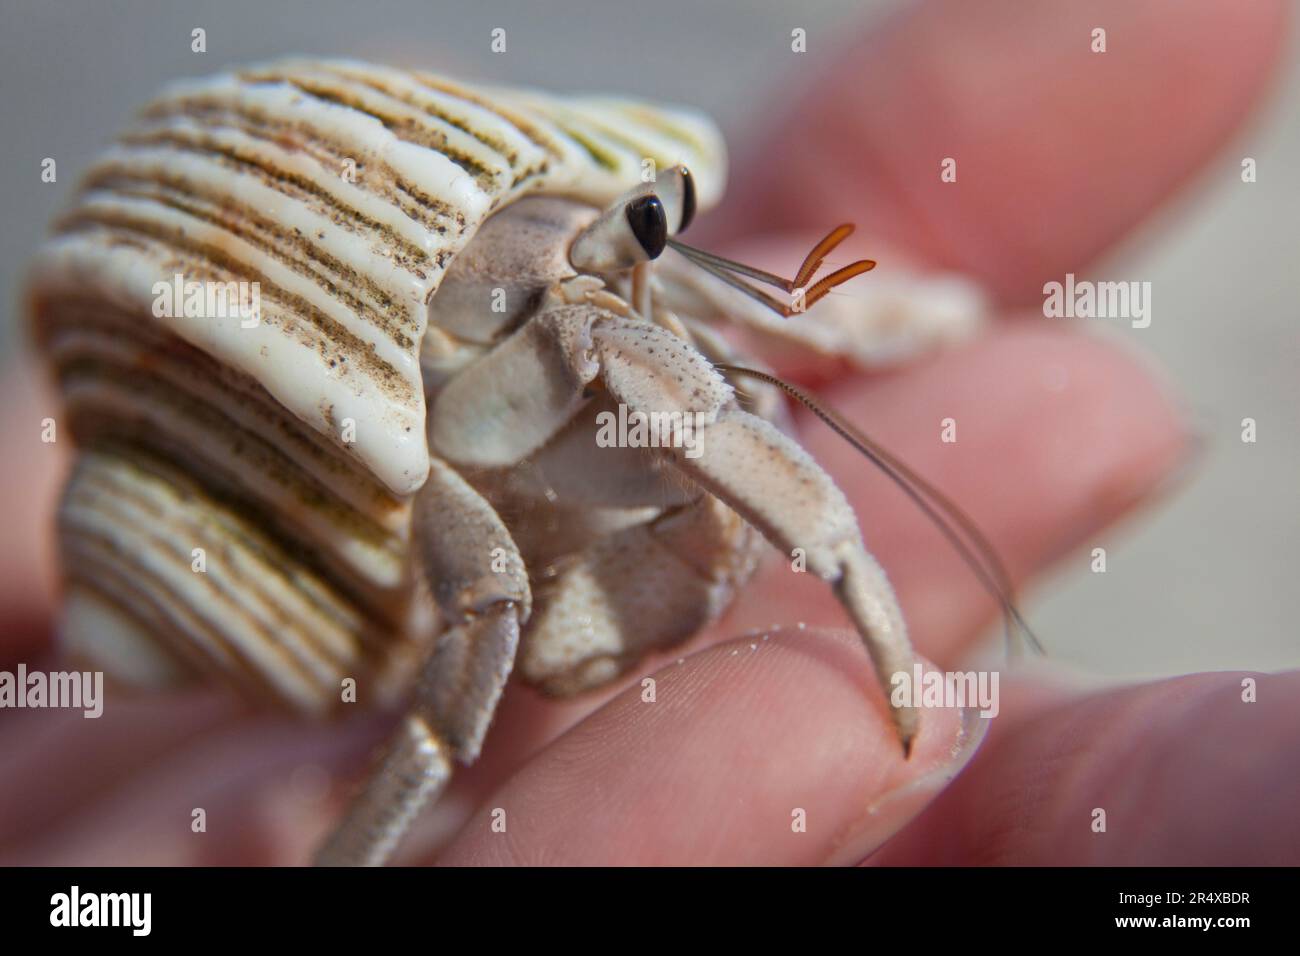 Hand holding a hermit crab; Seychelles Stock Photo